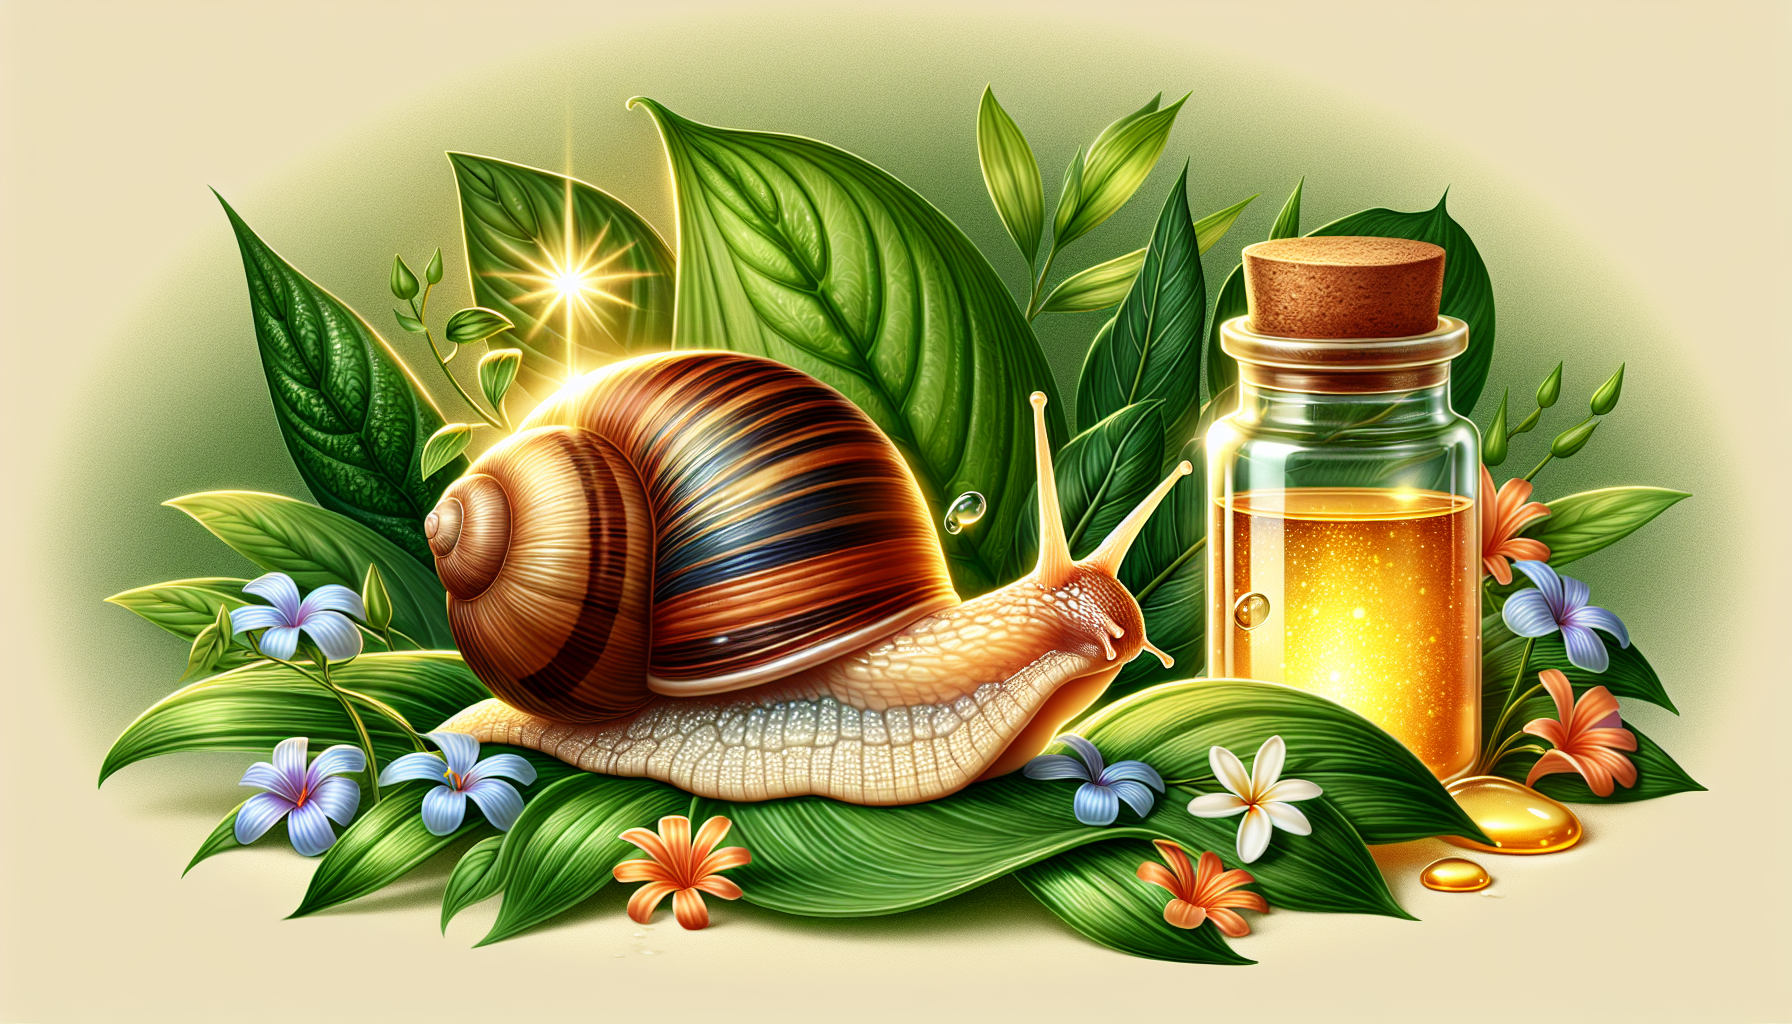 Ferment filtrate and snail mucin skincare ingredients